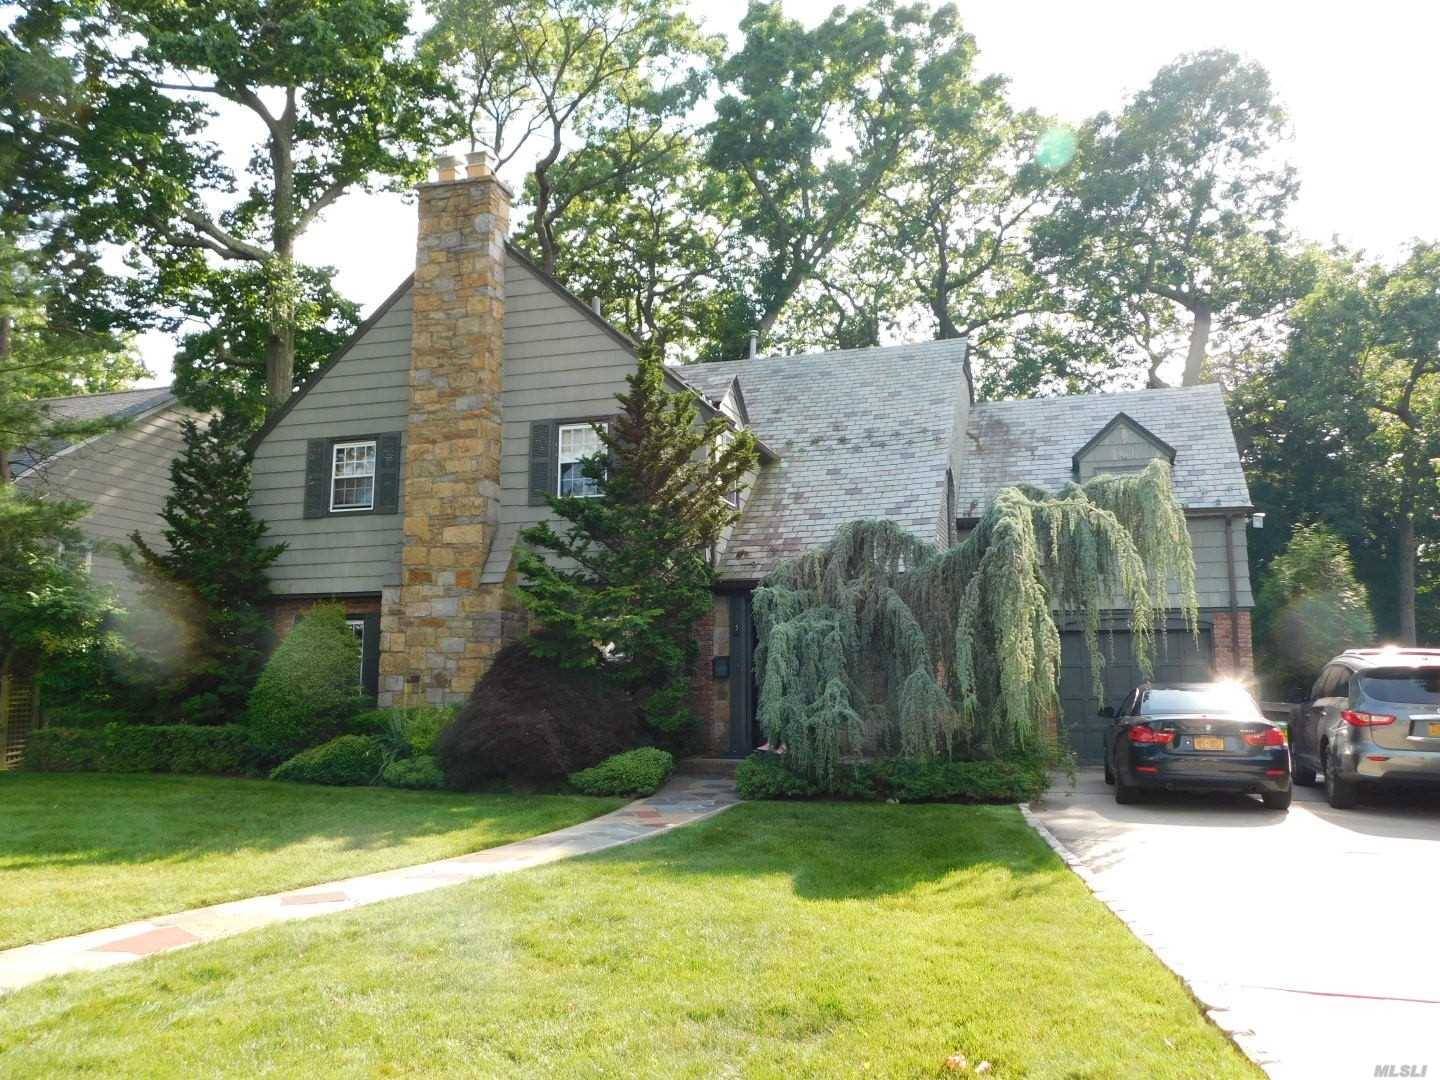 Grand Entry Colonial Situated On Exclusive Cul-De-Sac Block In Lawrence In A Park-Like Setting.